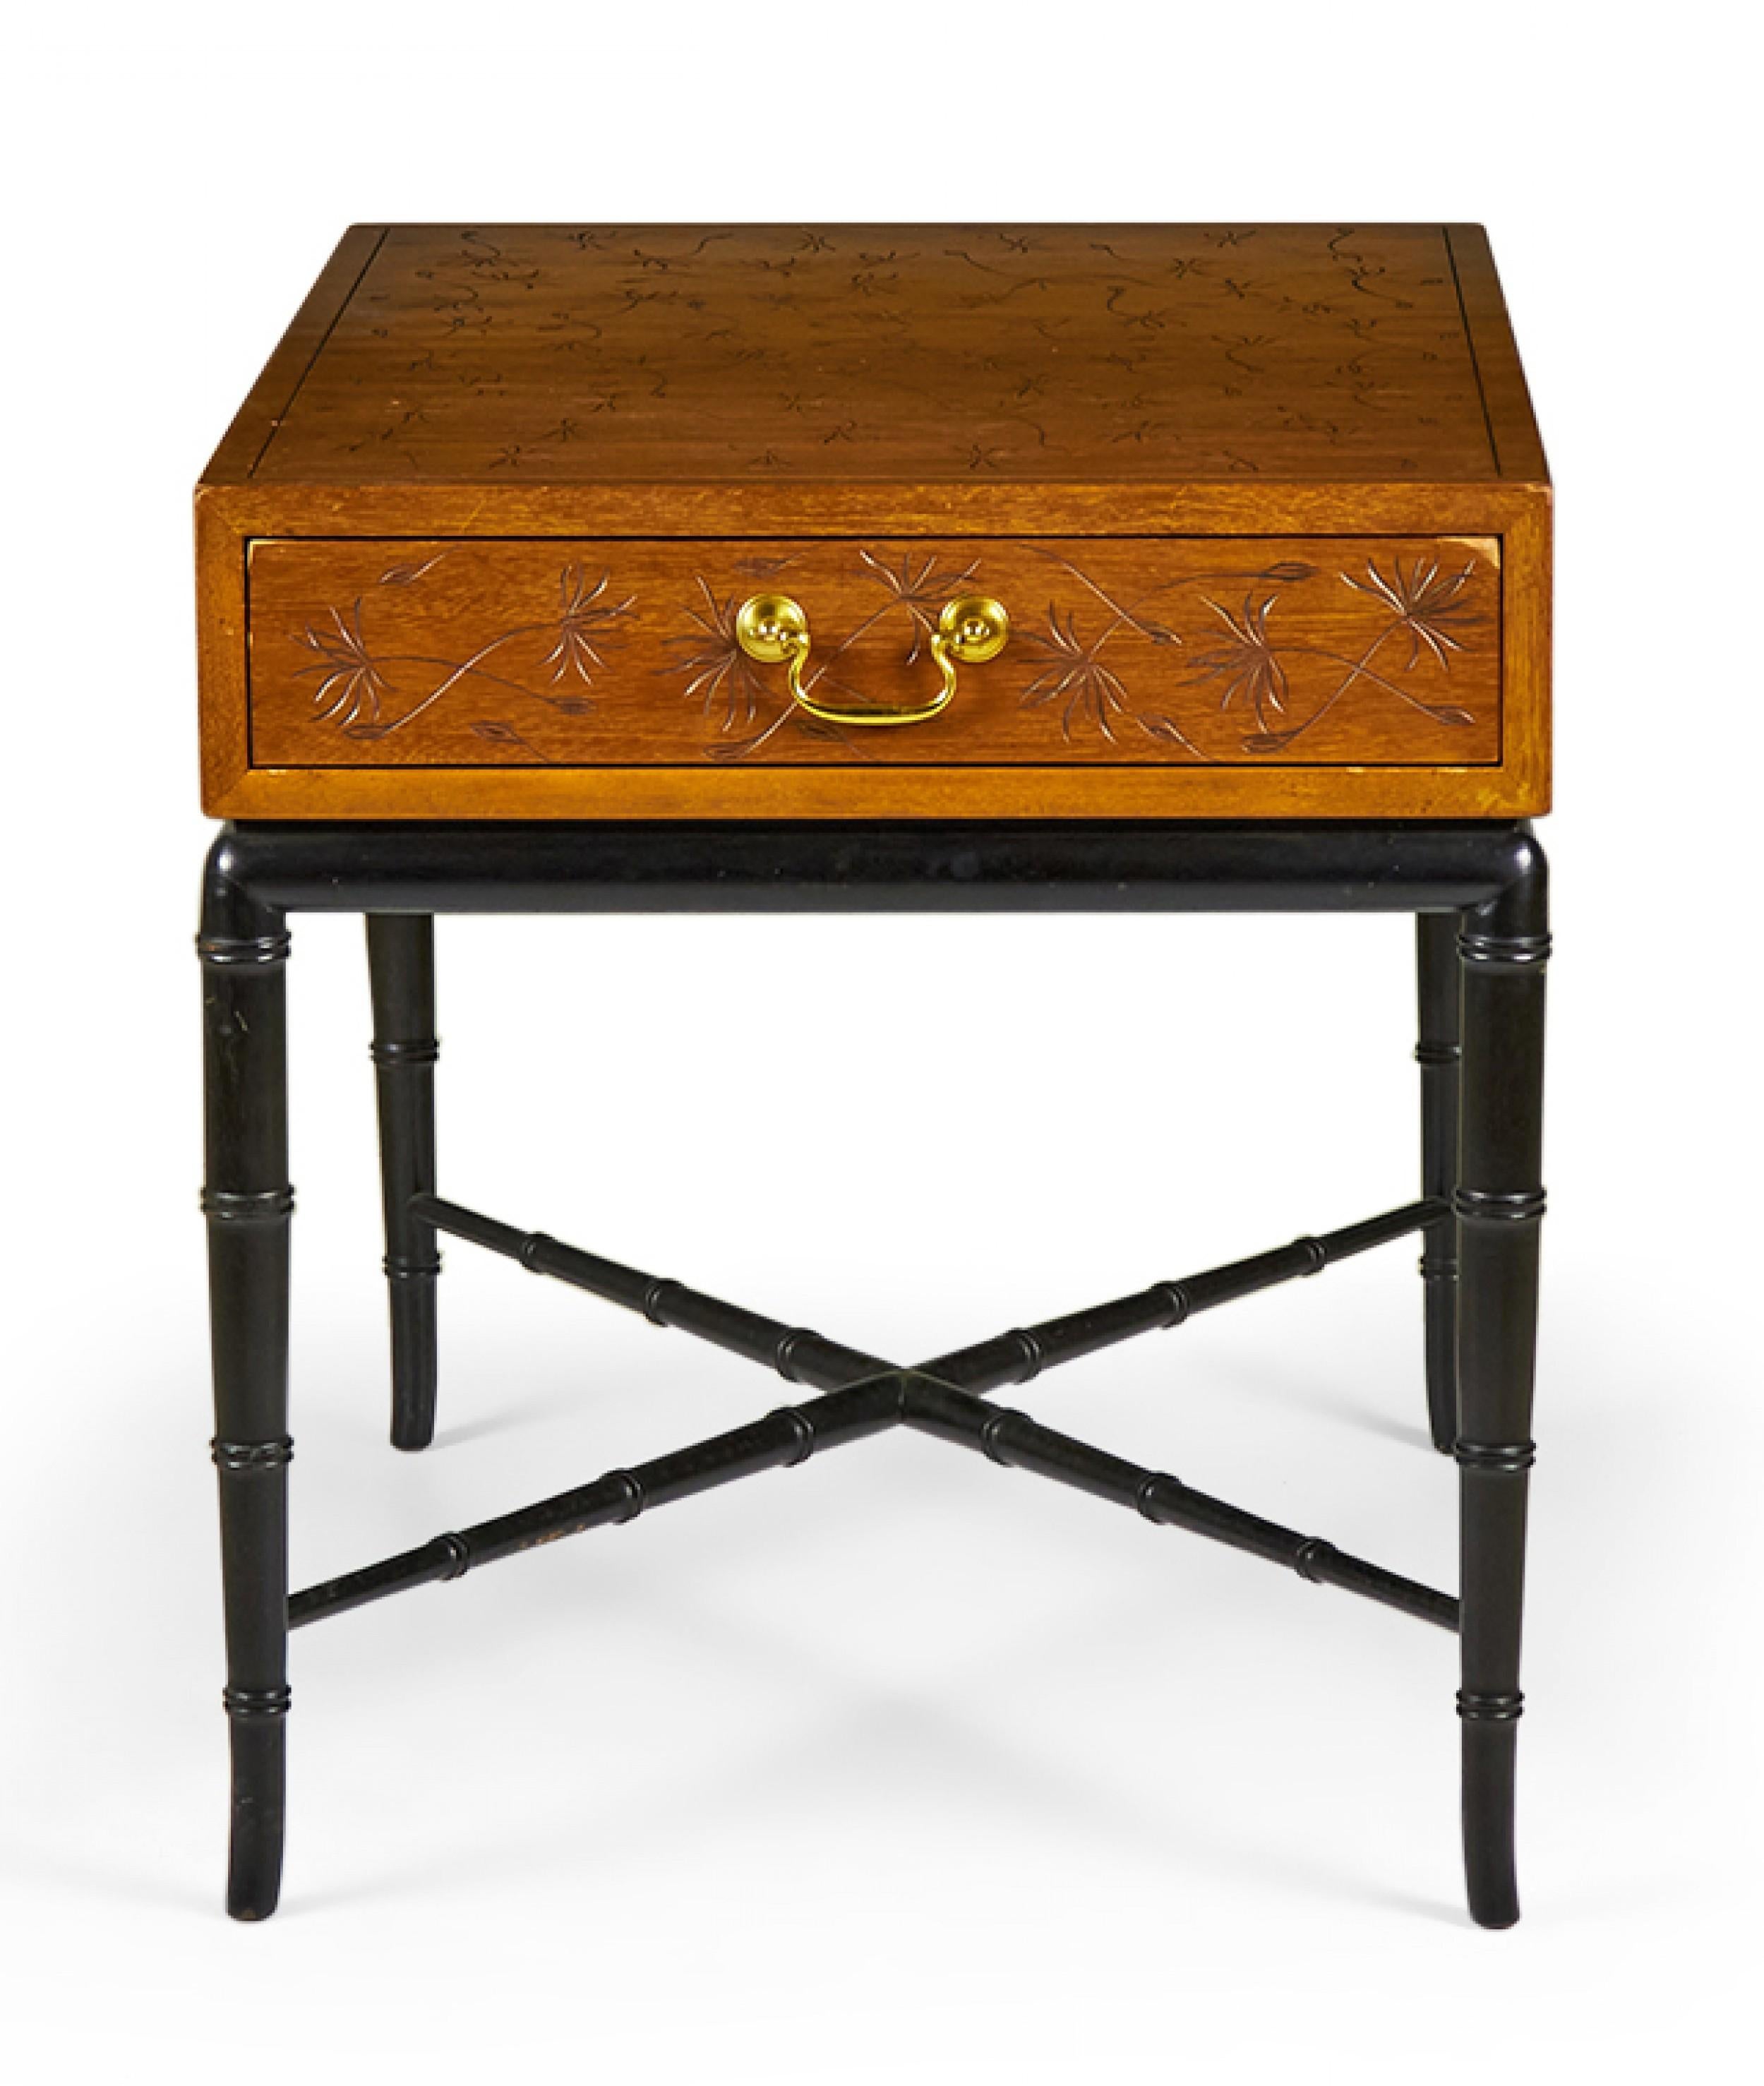 PAIR of Hollywood Regency-style (1950s) end / side tables with a walnut top section with an incised dandelion design and a single drawer with a brass drawer pull, resting on a black lacquered faux bamboo base with four tapered legs and an x-shaped